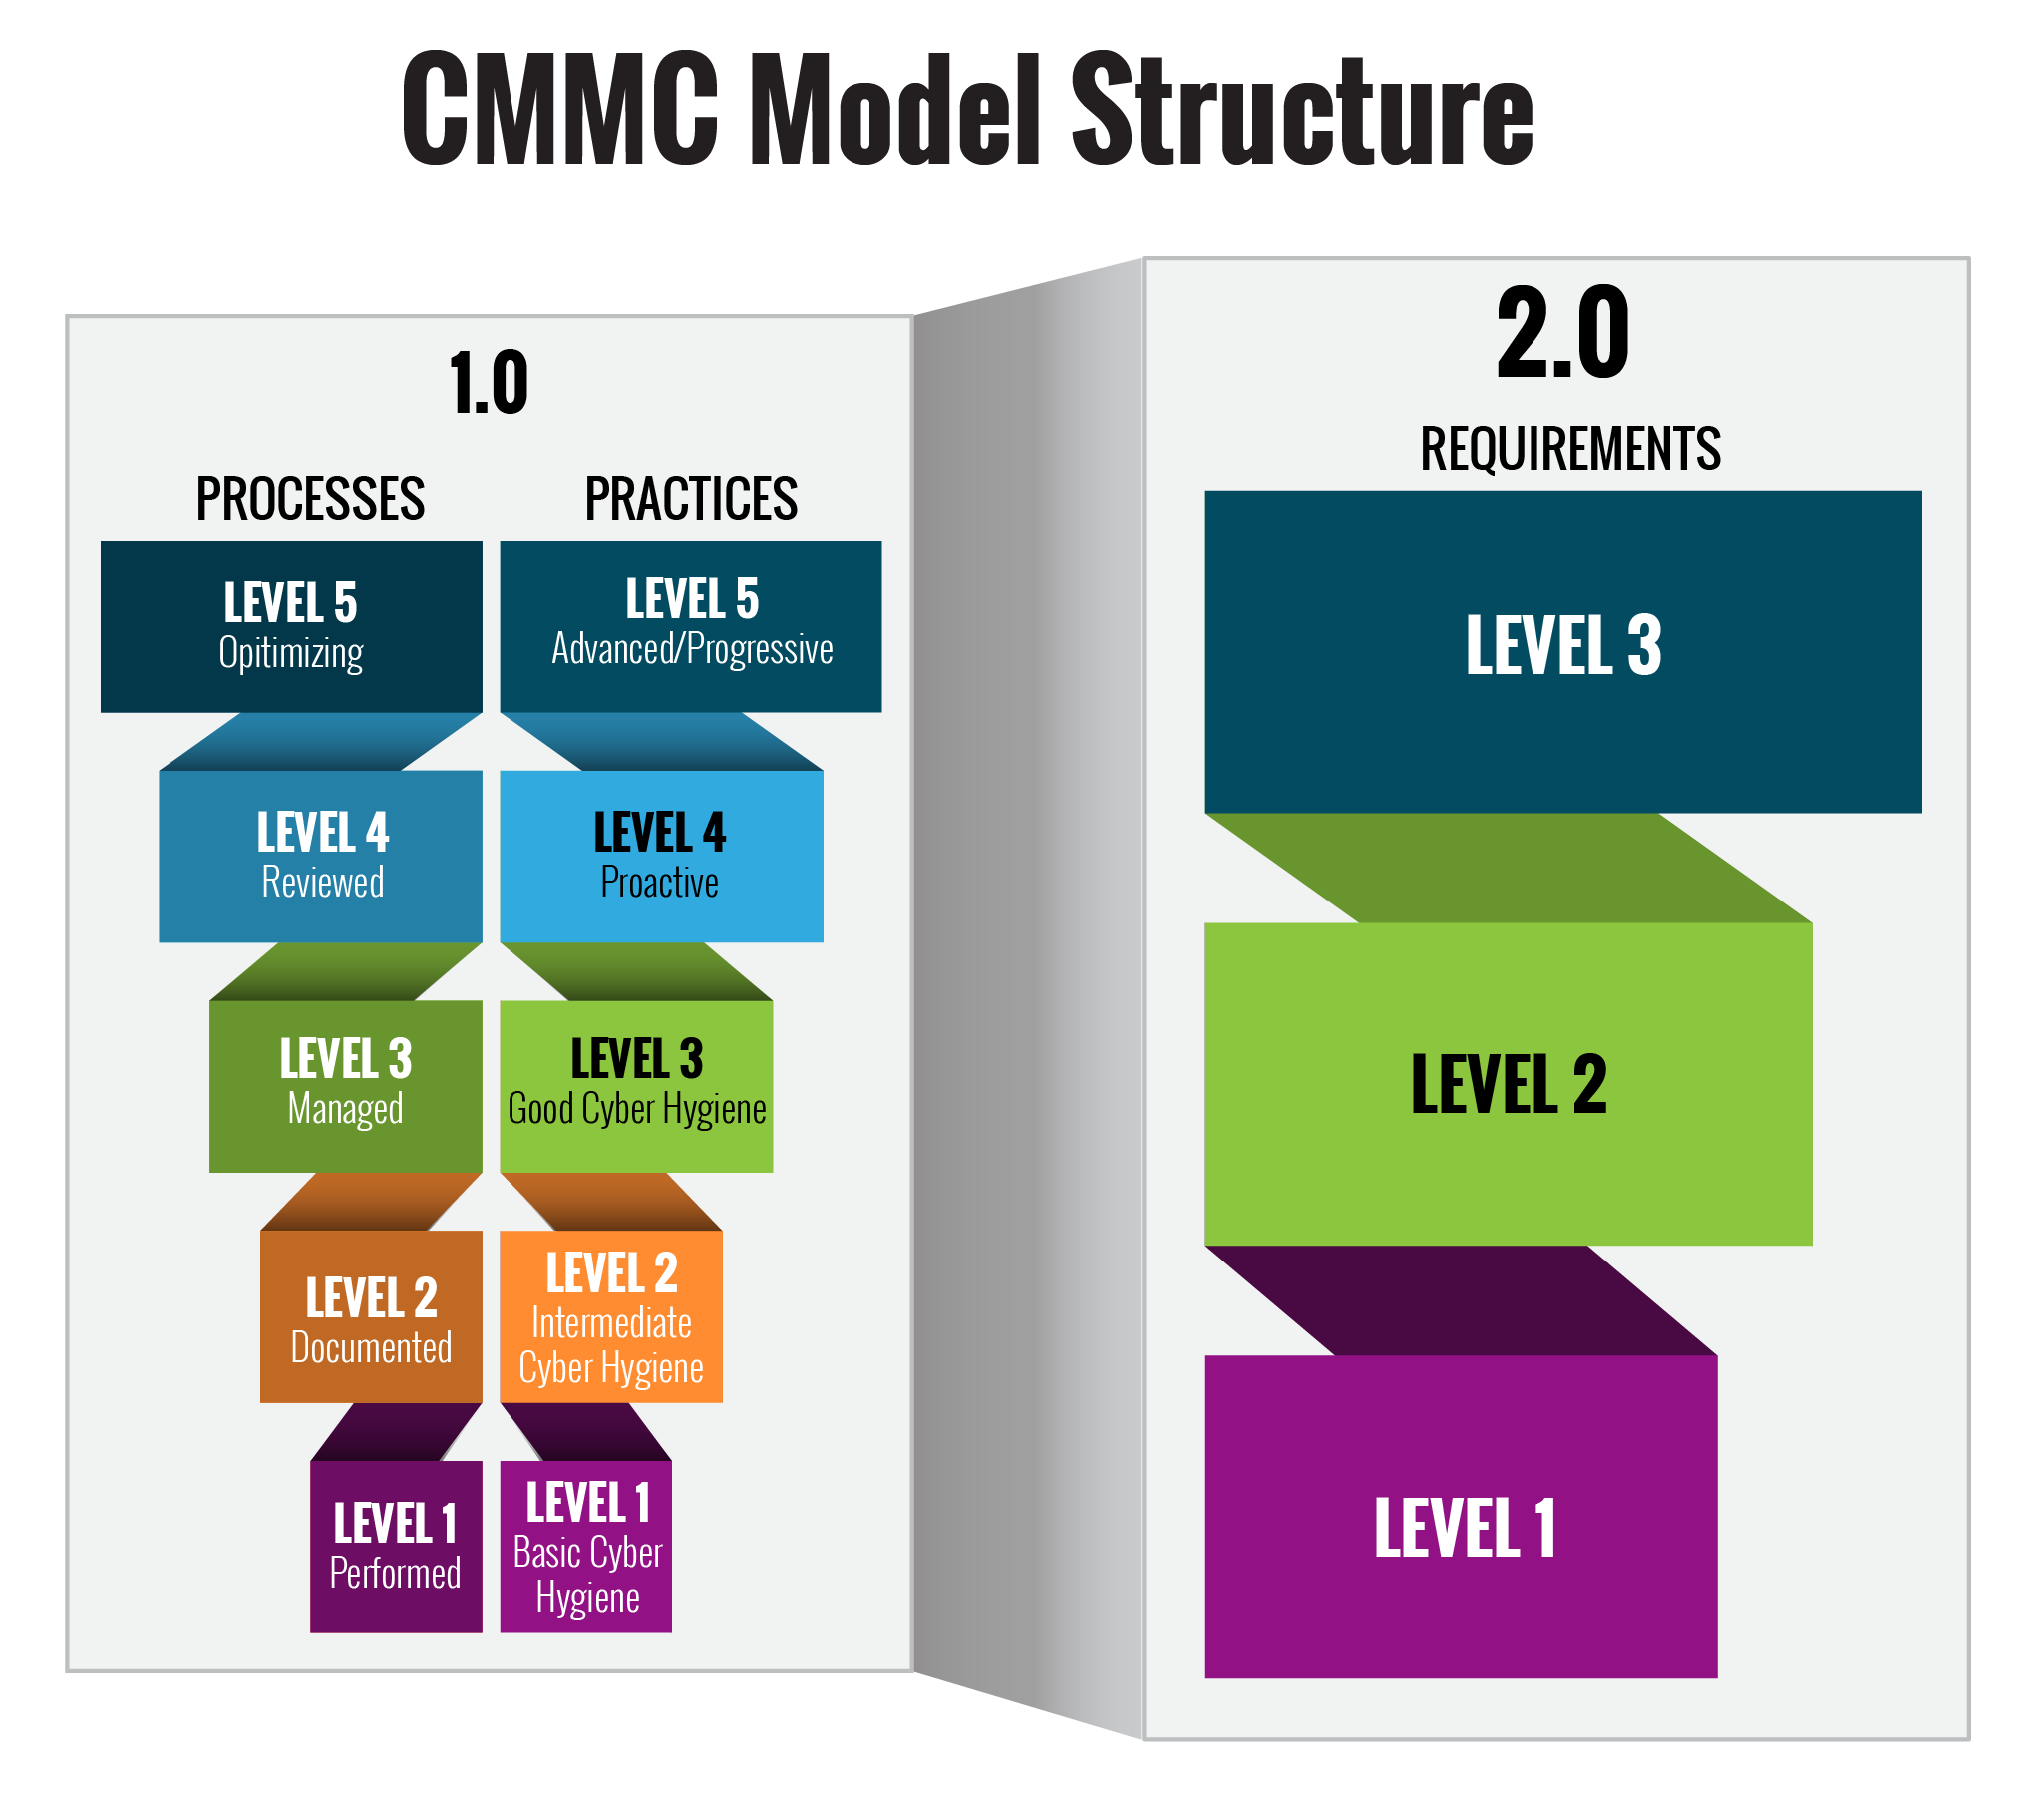 CMMC is consolidating from 5 levels to 3. The 17 CMMC Level 1 controls cover a wide range of best practices.